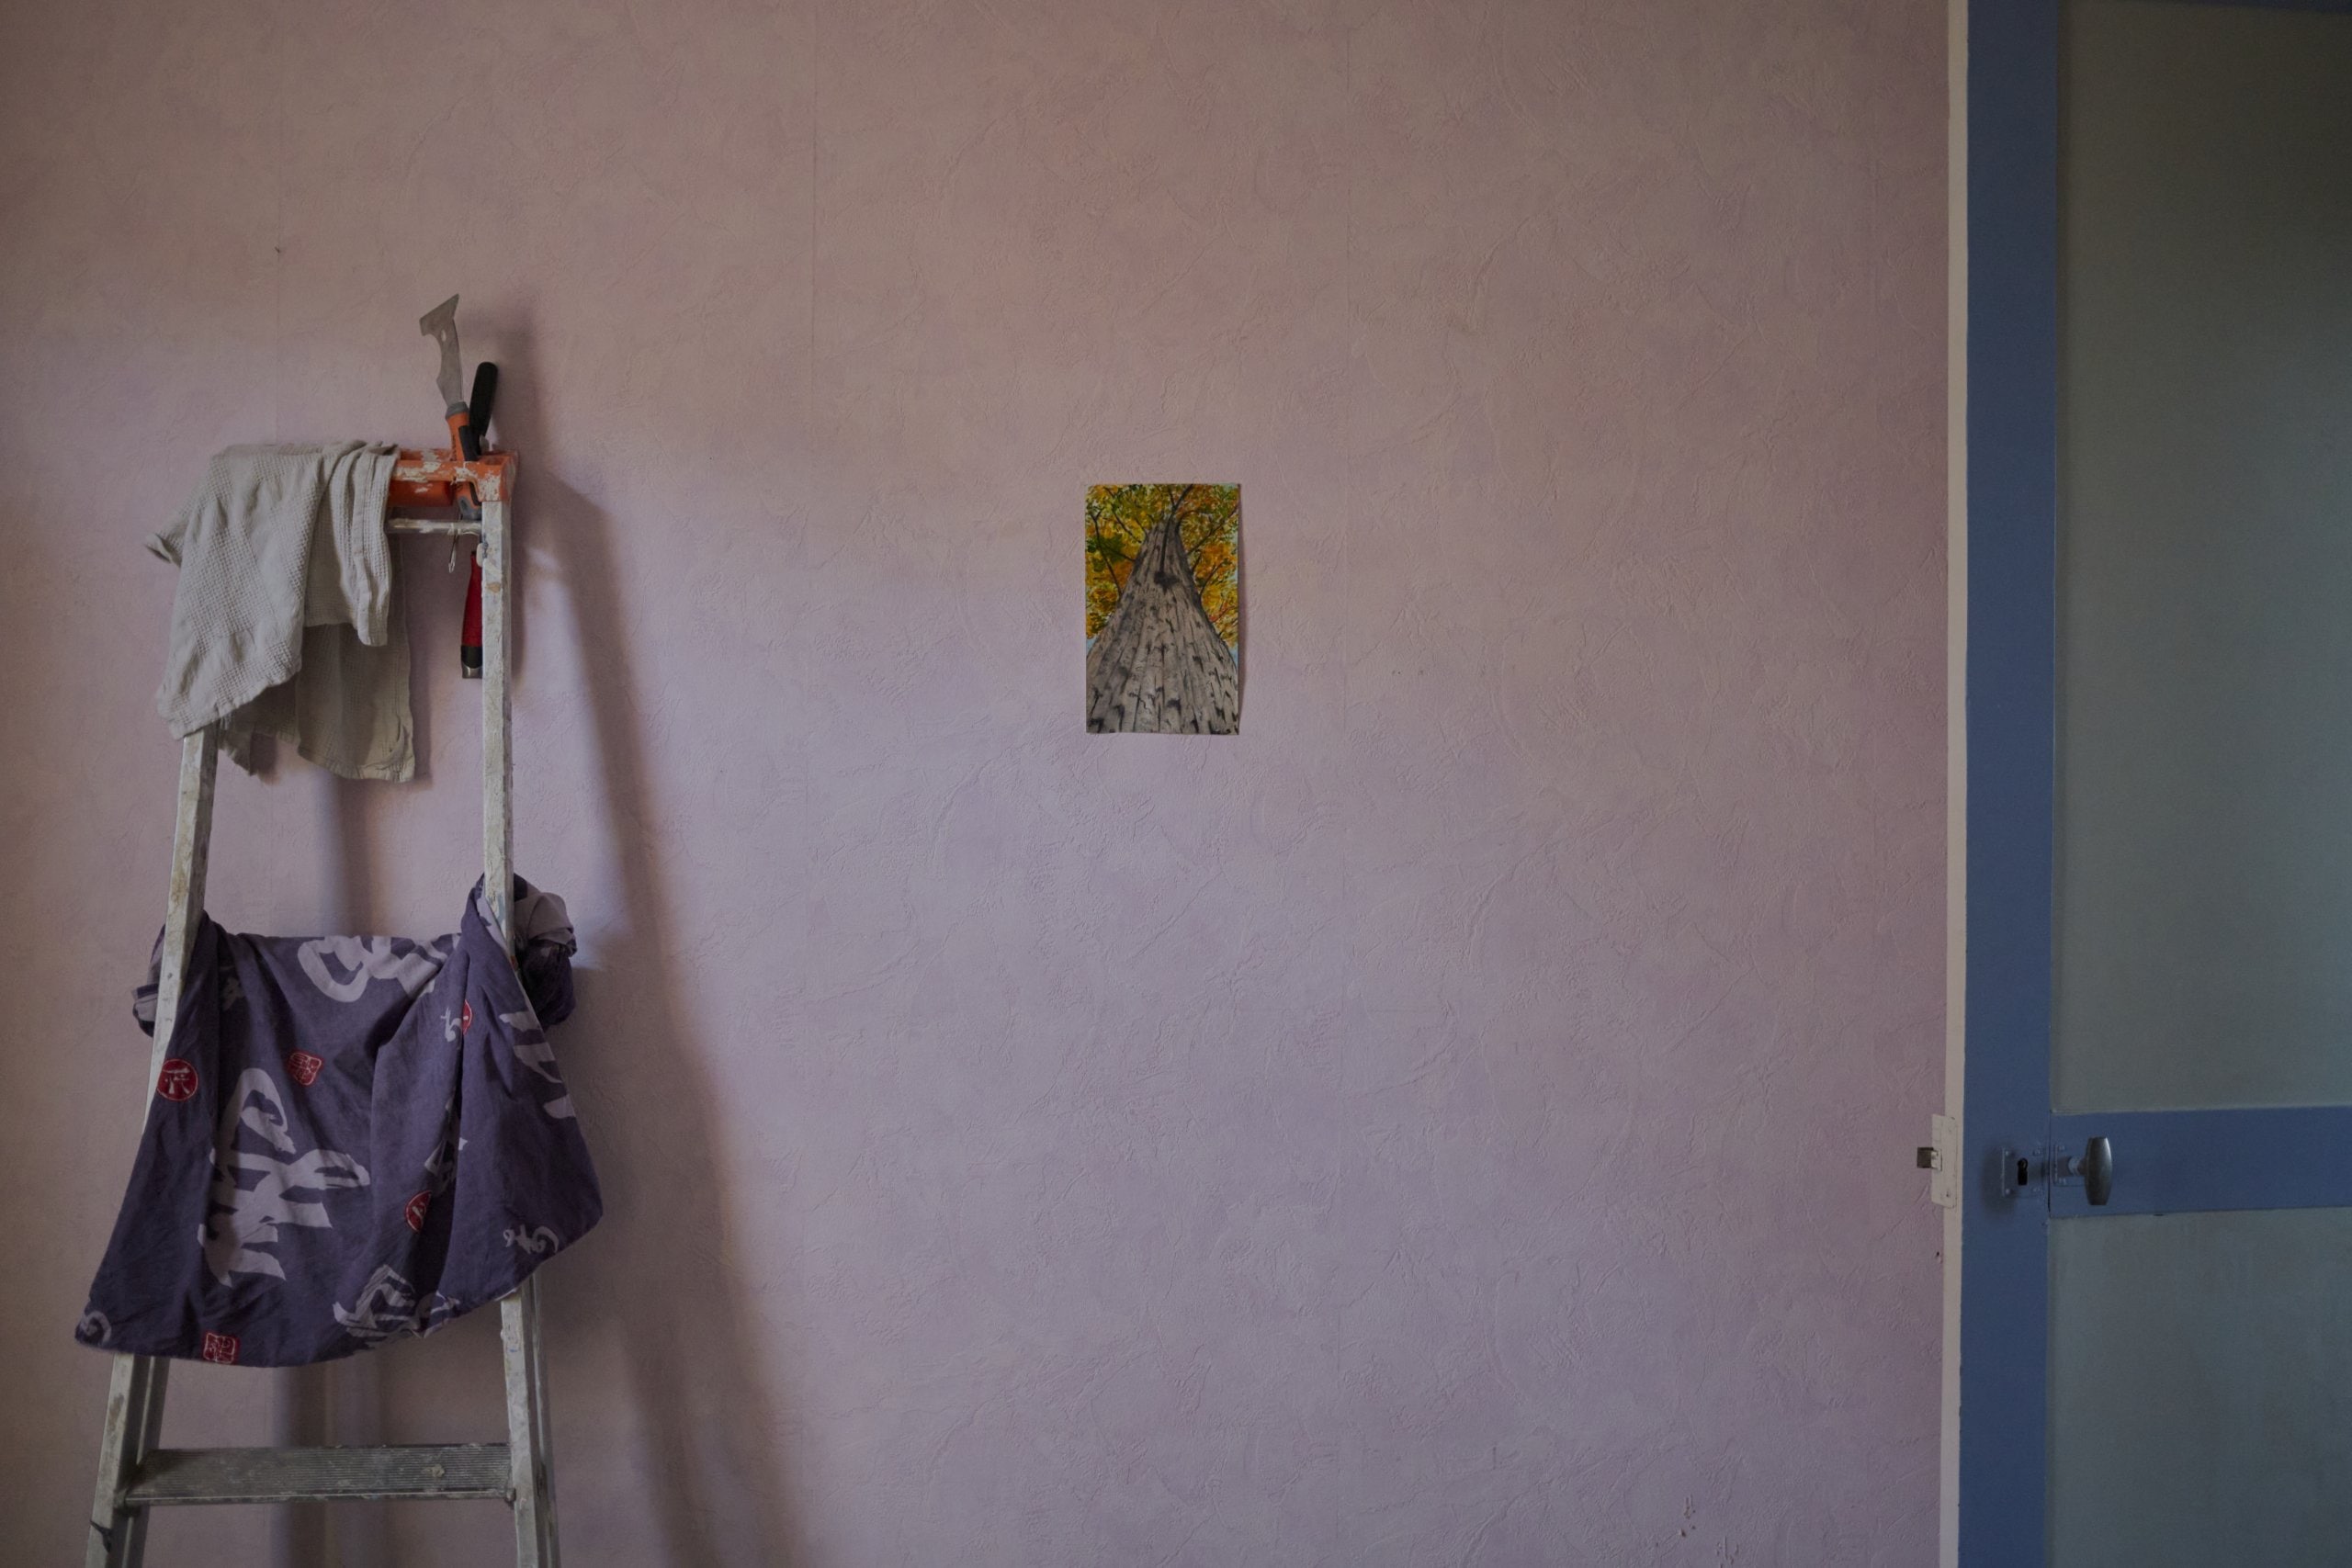 A picture of a tree on a pink wall, a ladder is standing next to it.